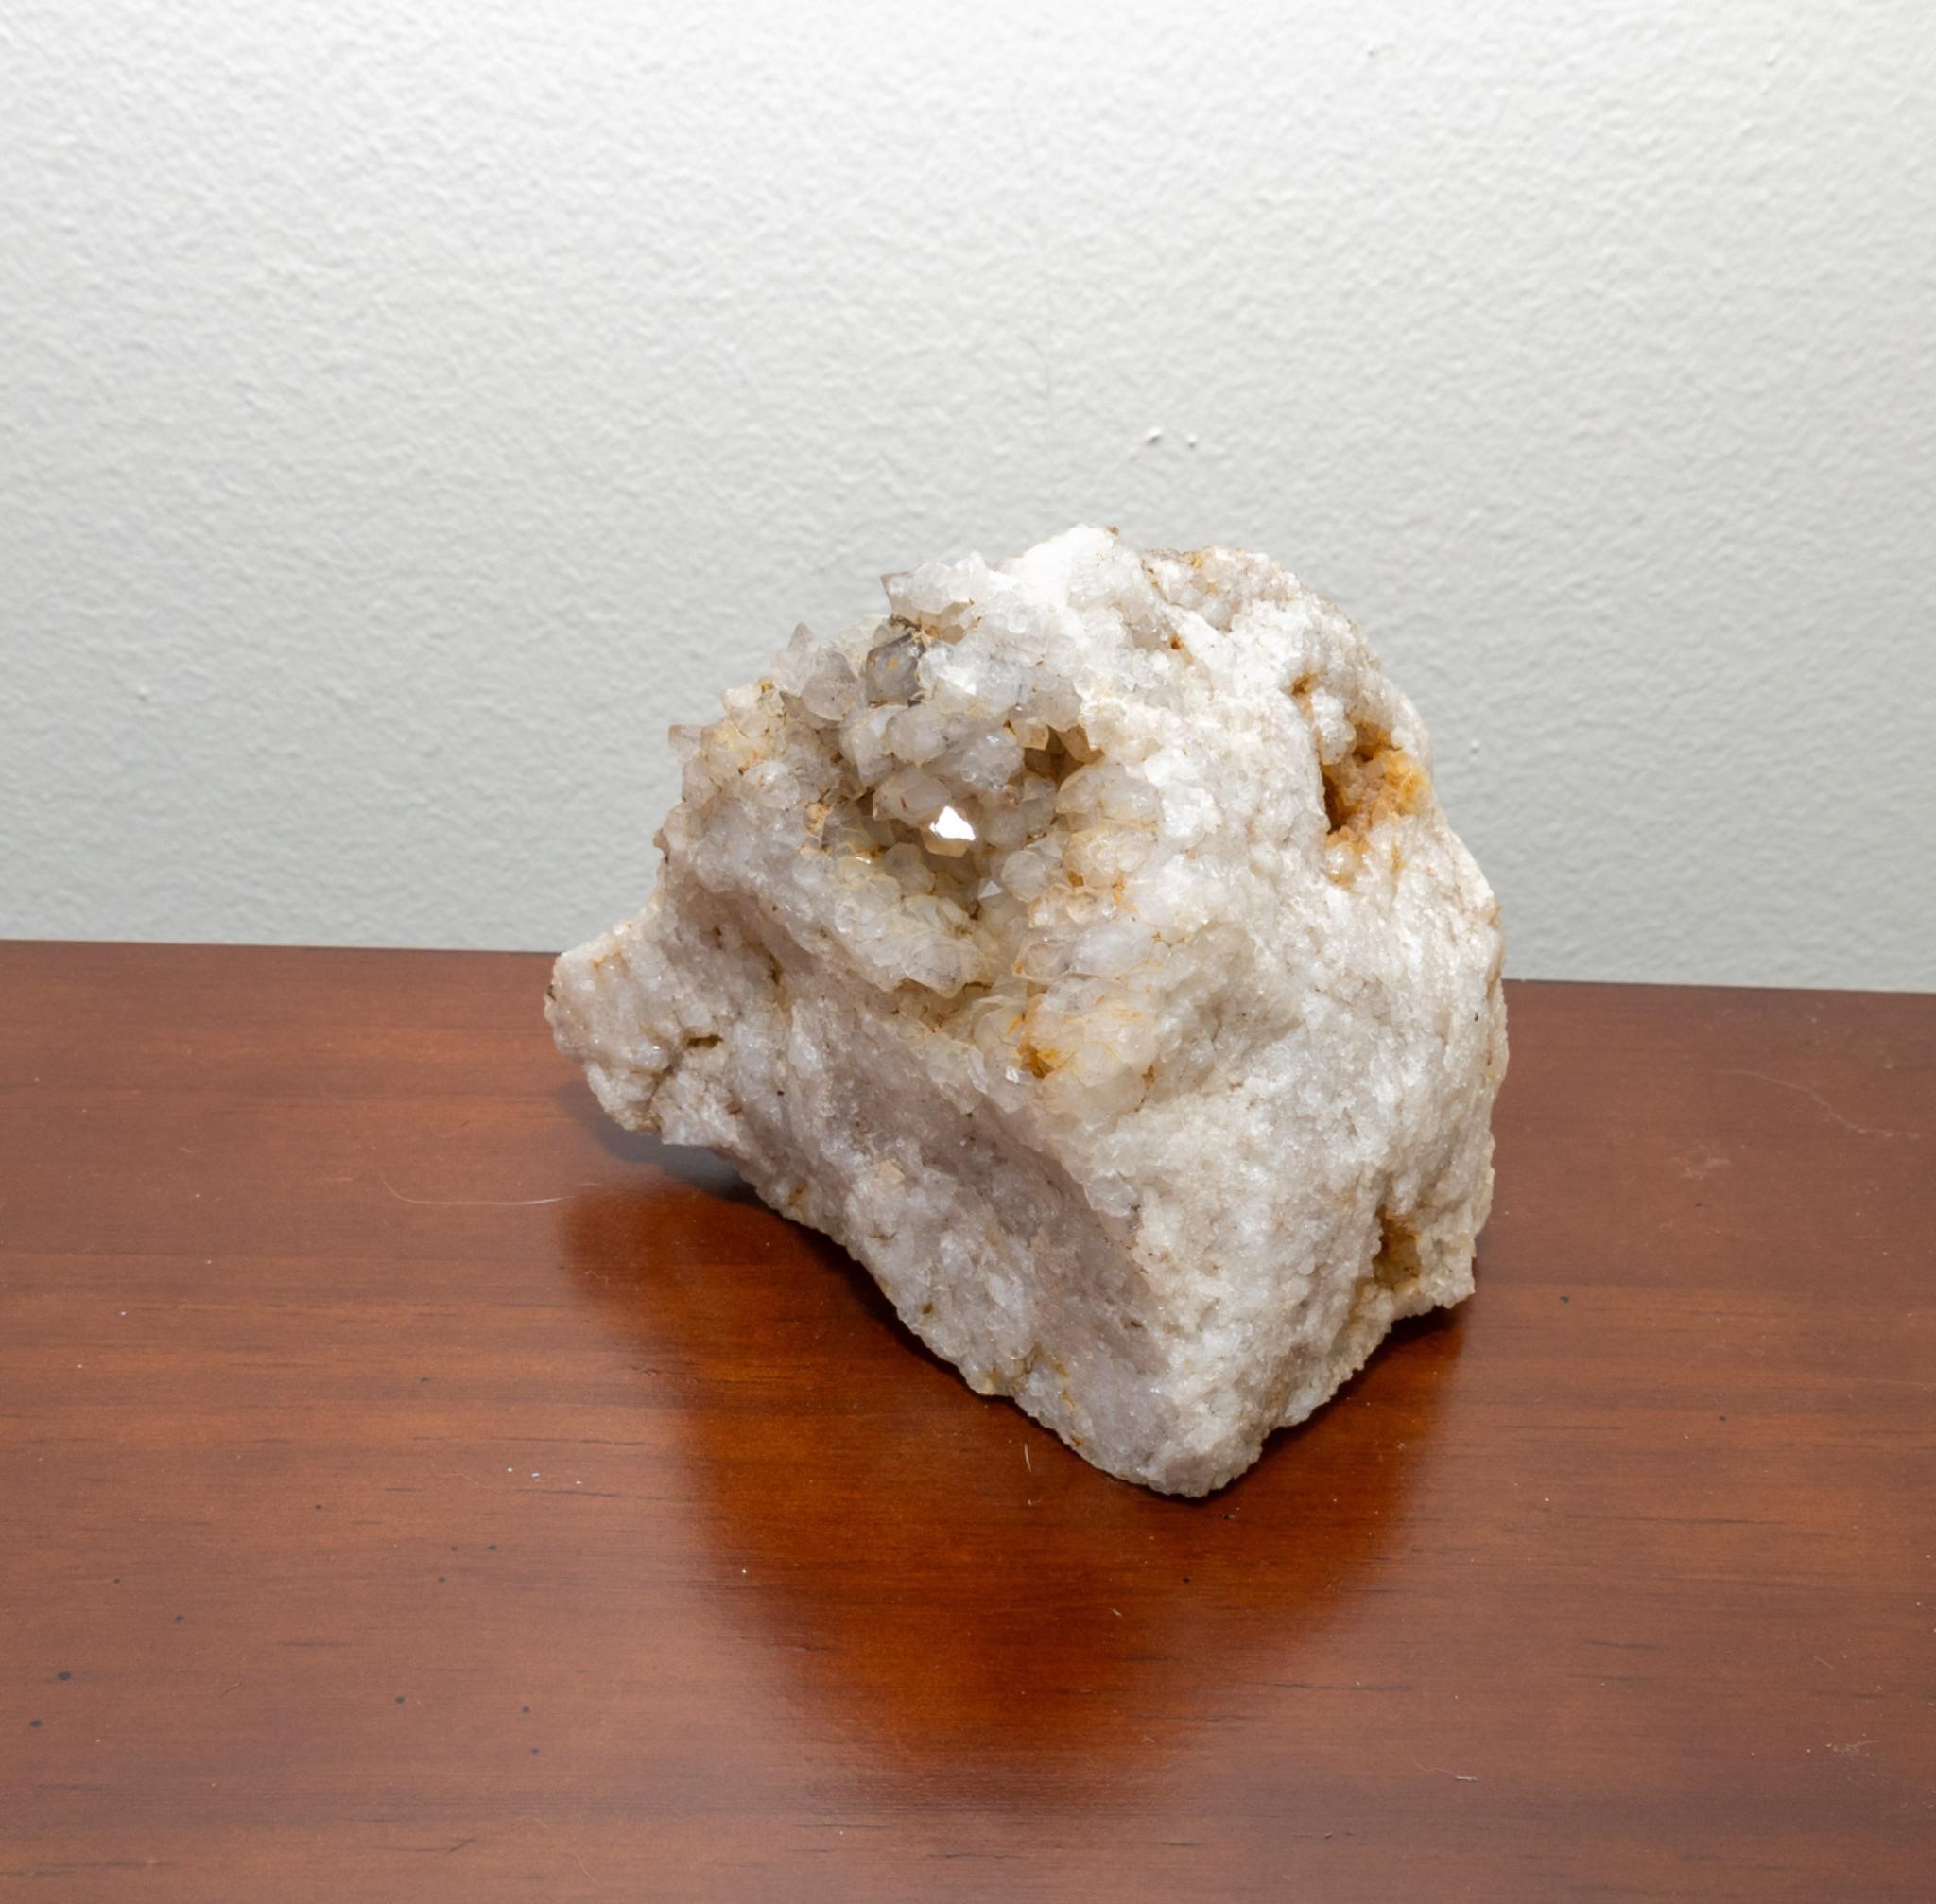 Large white geode/mineral